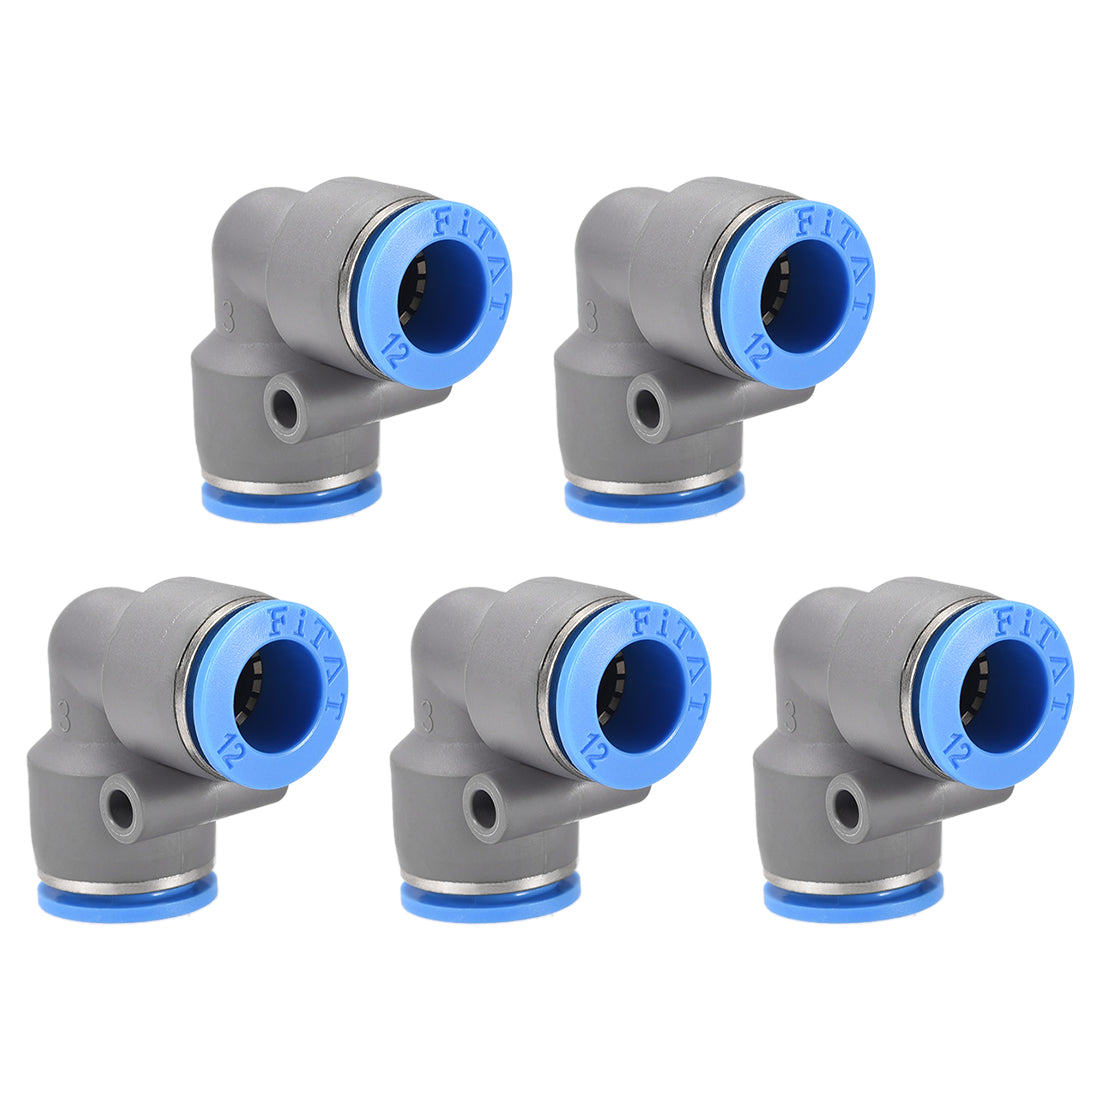 Uxcell Uxcell Elbow Push to Connect Air Fittings 6mm Tube OD Pneumatic Quick Release Connectors Grey 5Pcs